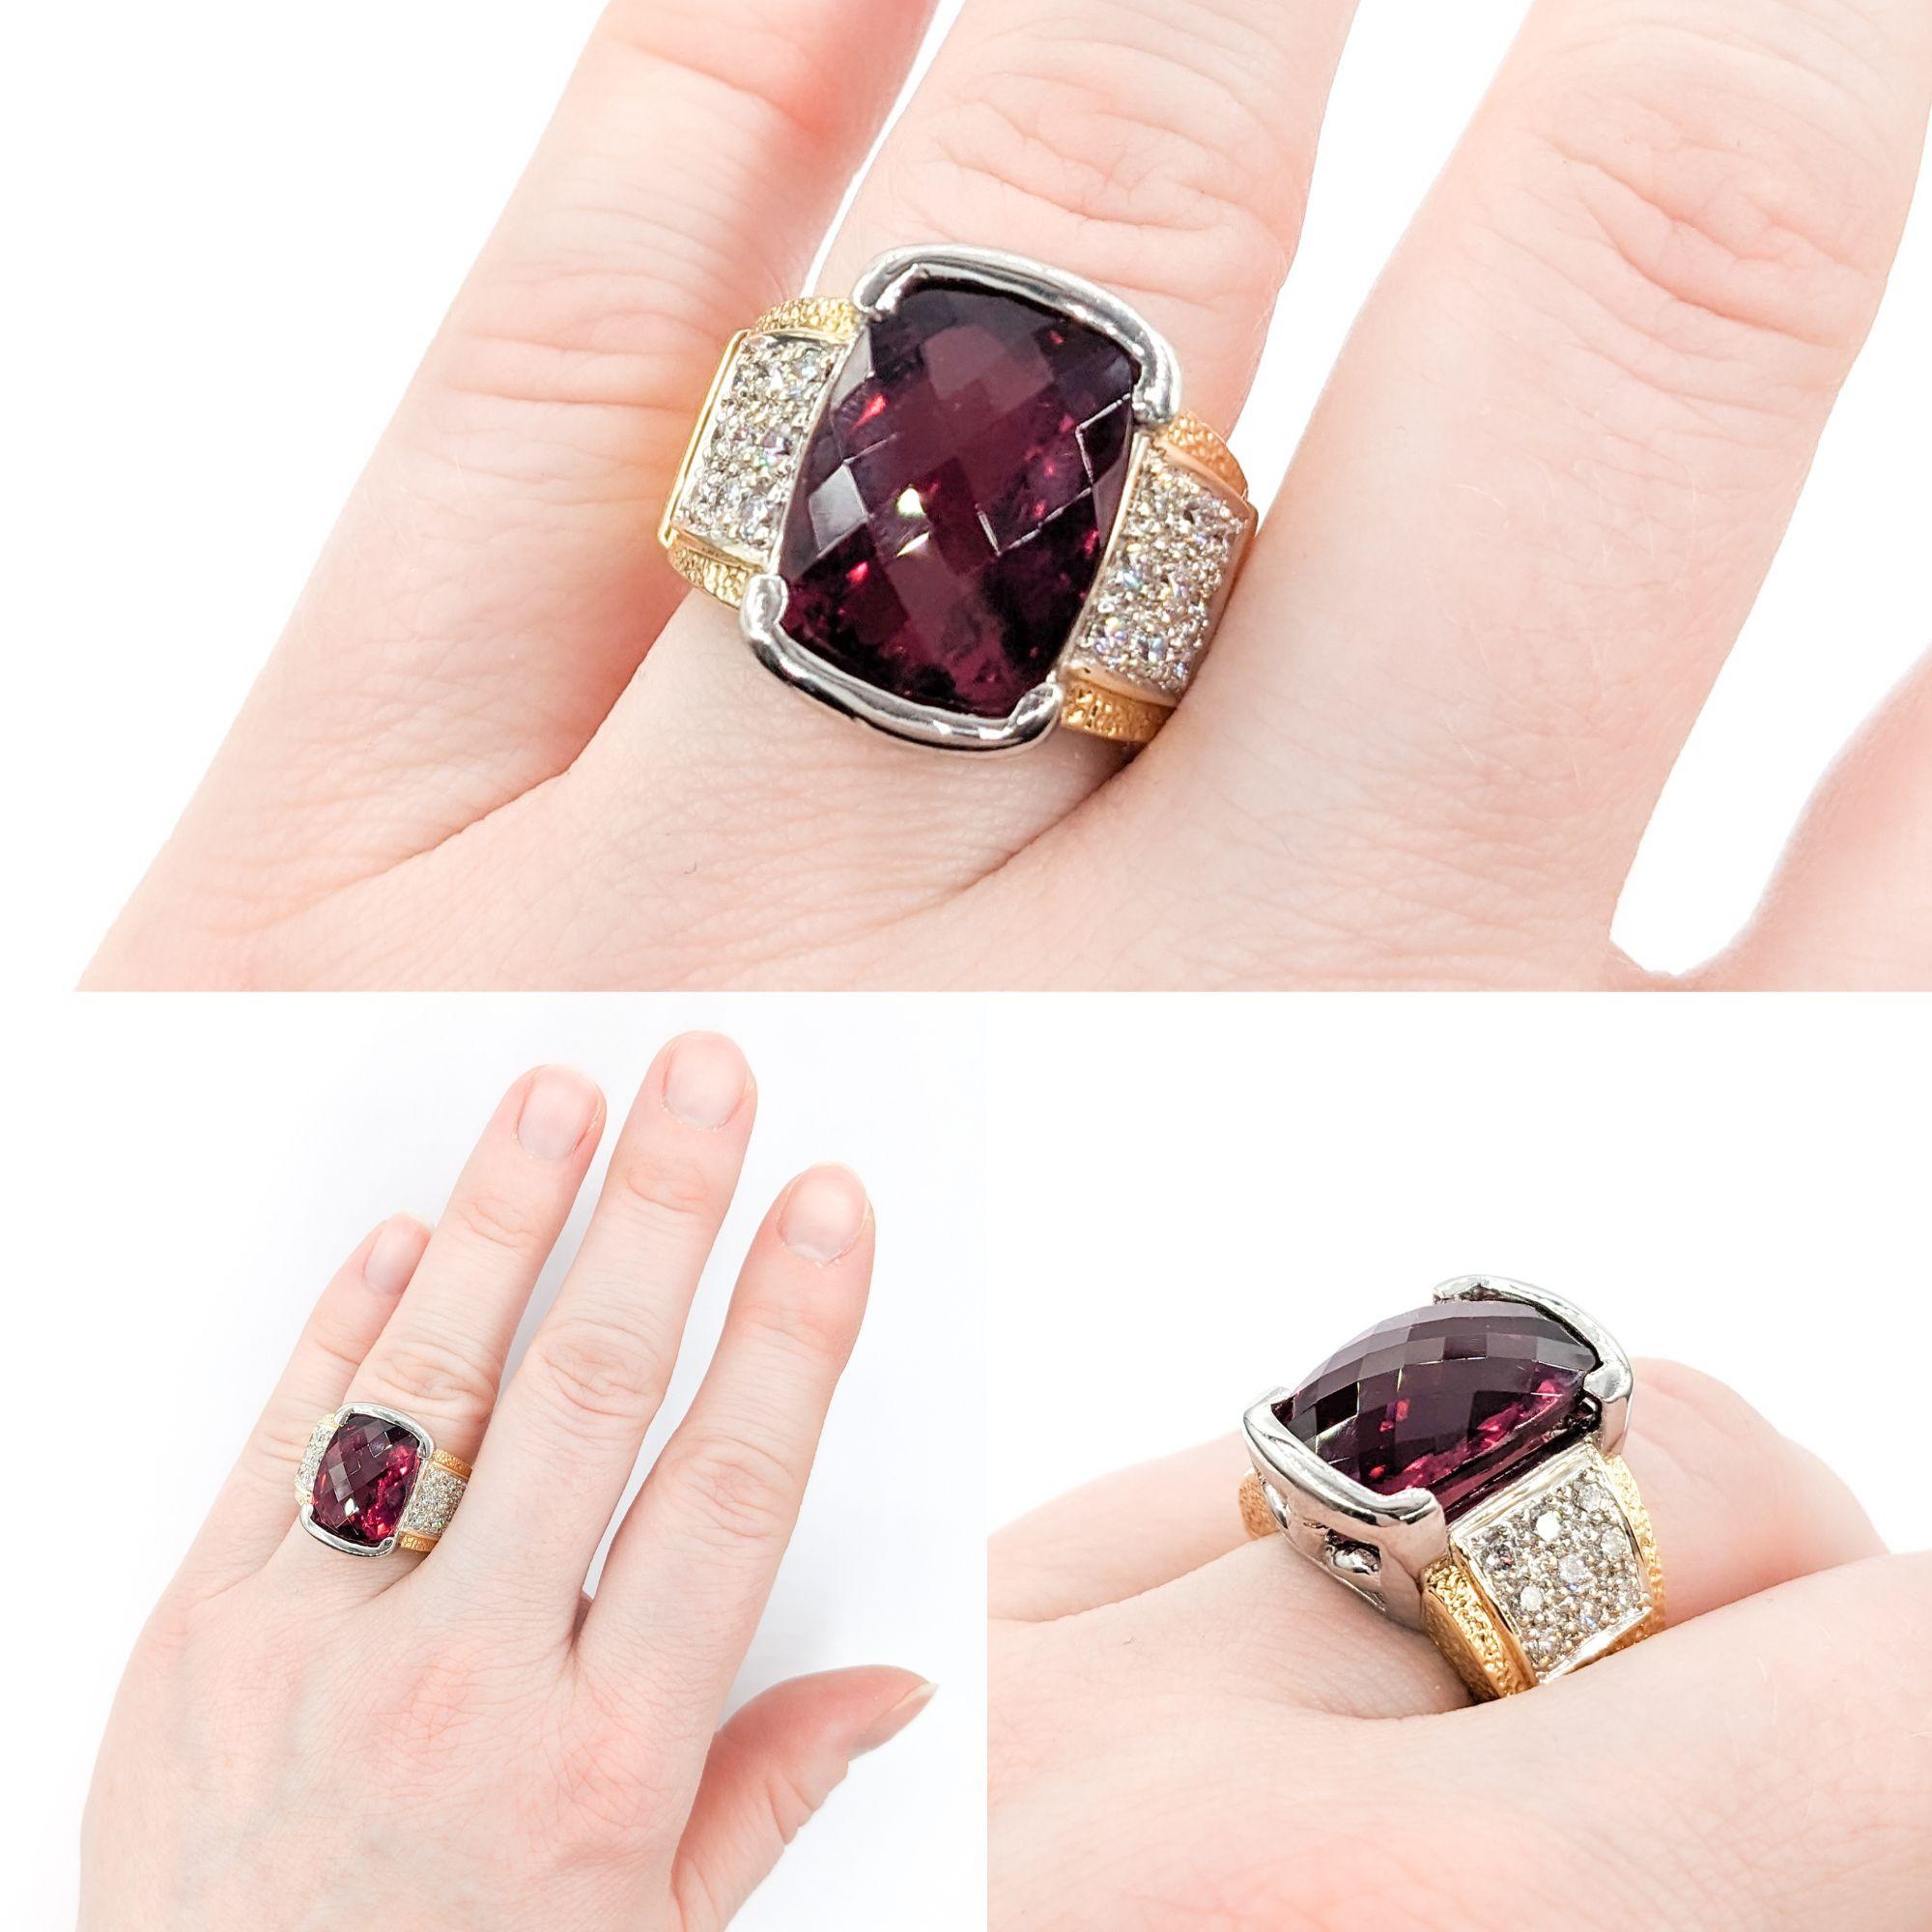 9.50ct Rubellite Tourmaline & .36ctw Diamond Ring In Two-Tone Gold


Showcasing a magnificent 9.50ct rubellite tourmaline centerpiece, this Gemstone Fashion Ring is masterfully crafted in 18ktt two-tone Gold. The ring is elegantly accented with